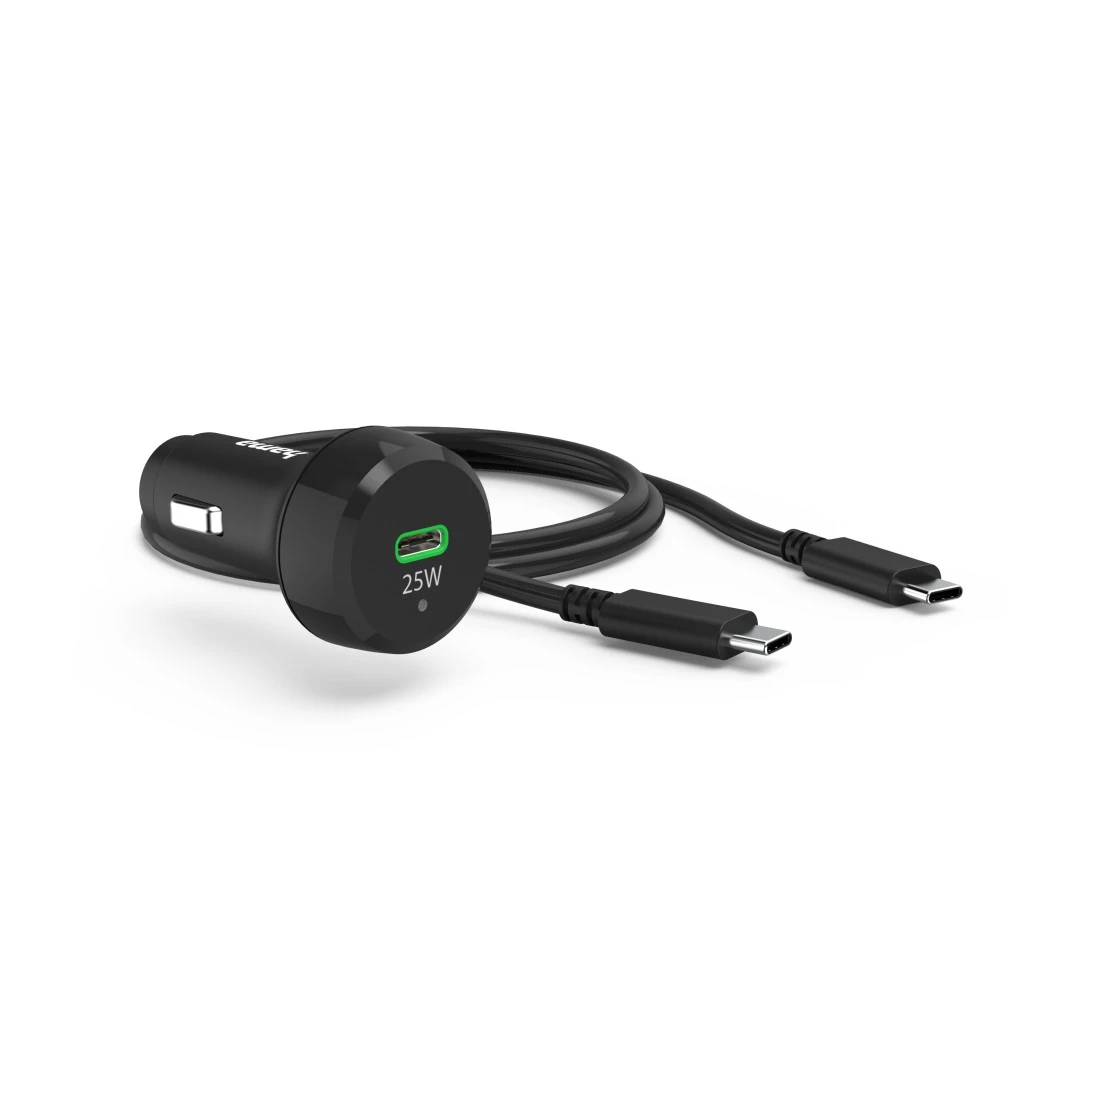 Chargeur Allume Cigare quick charge + cable USB type C - Équipement auto